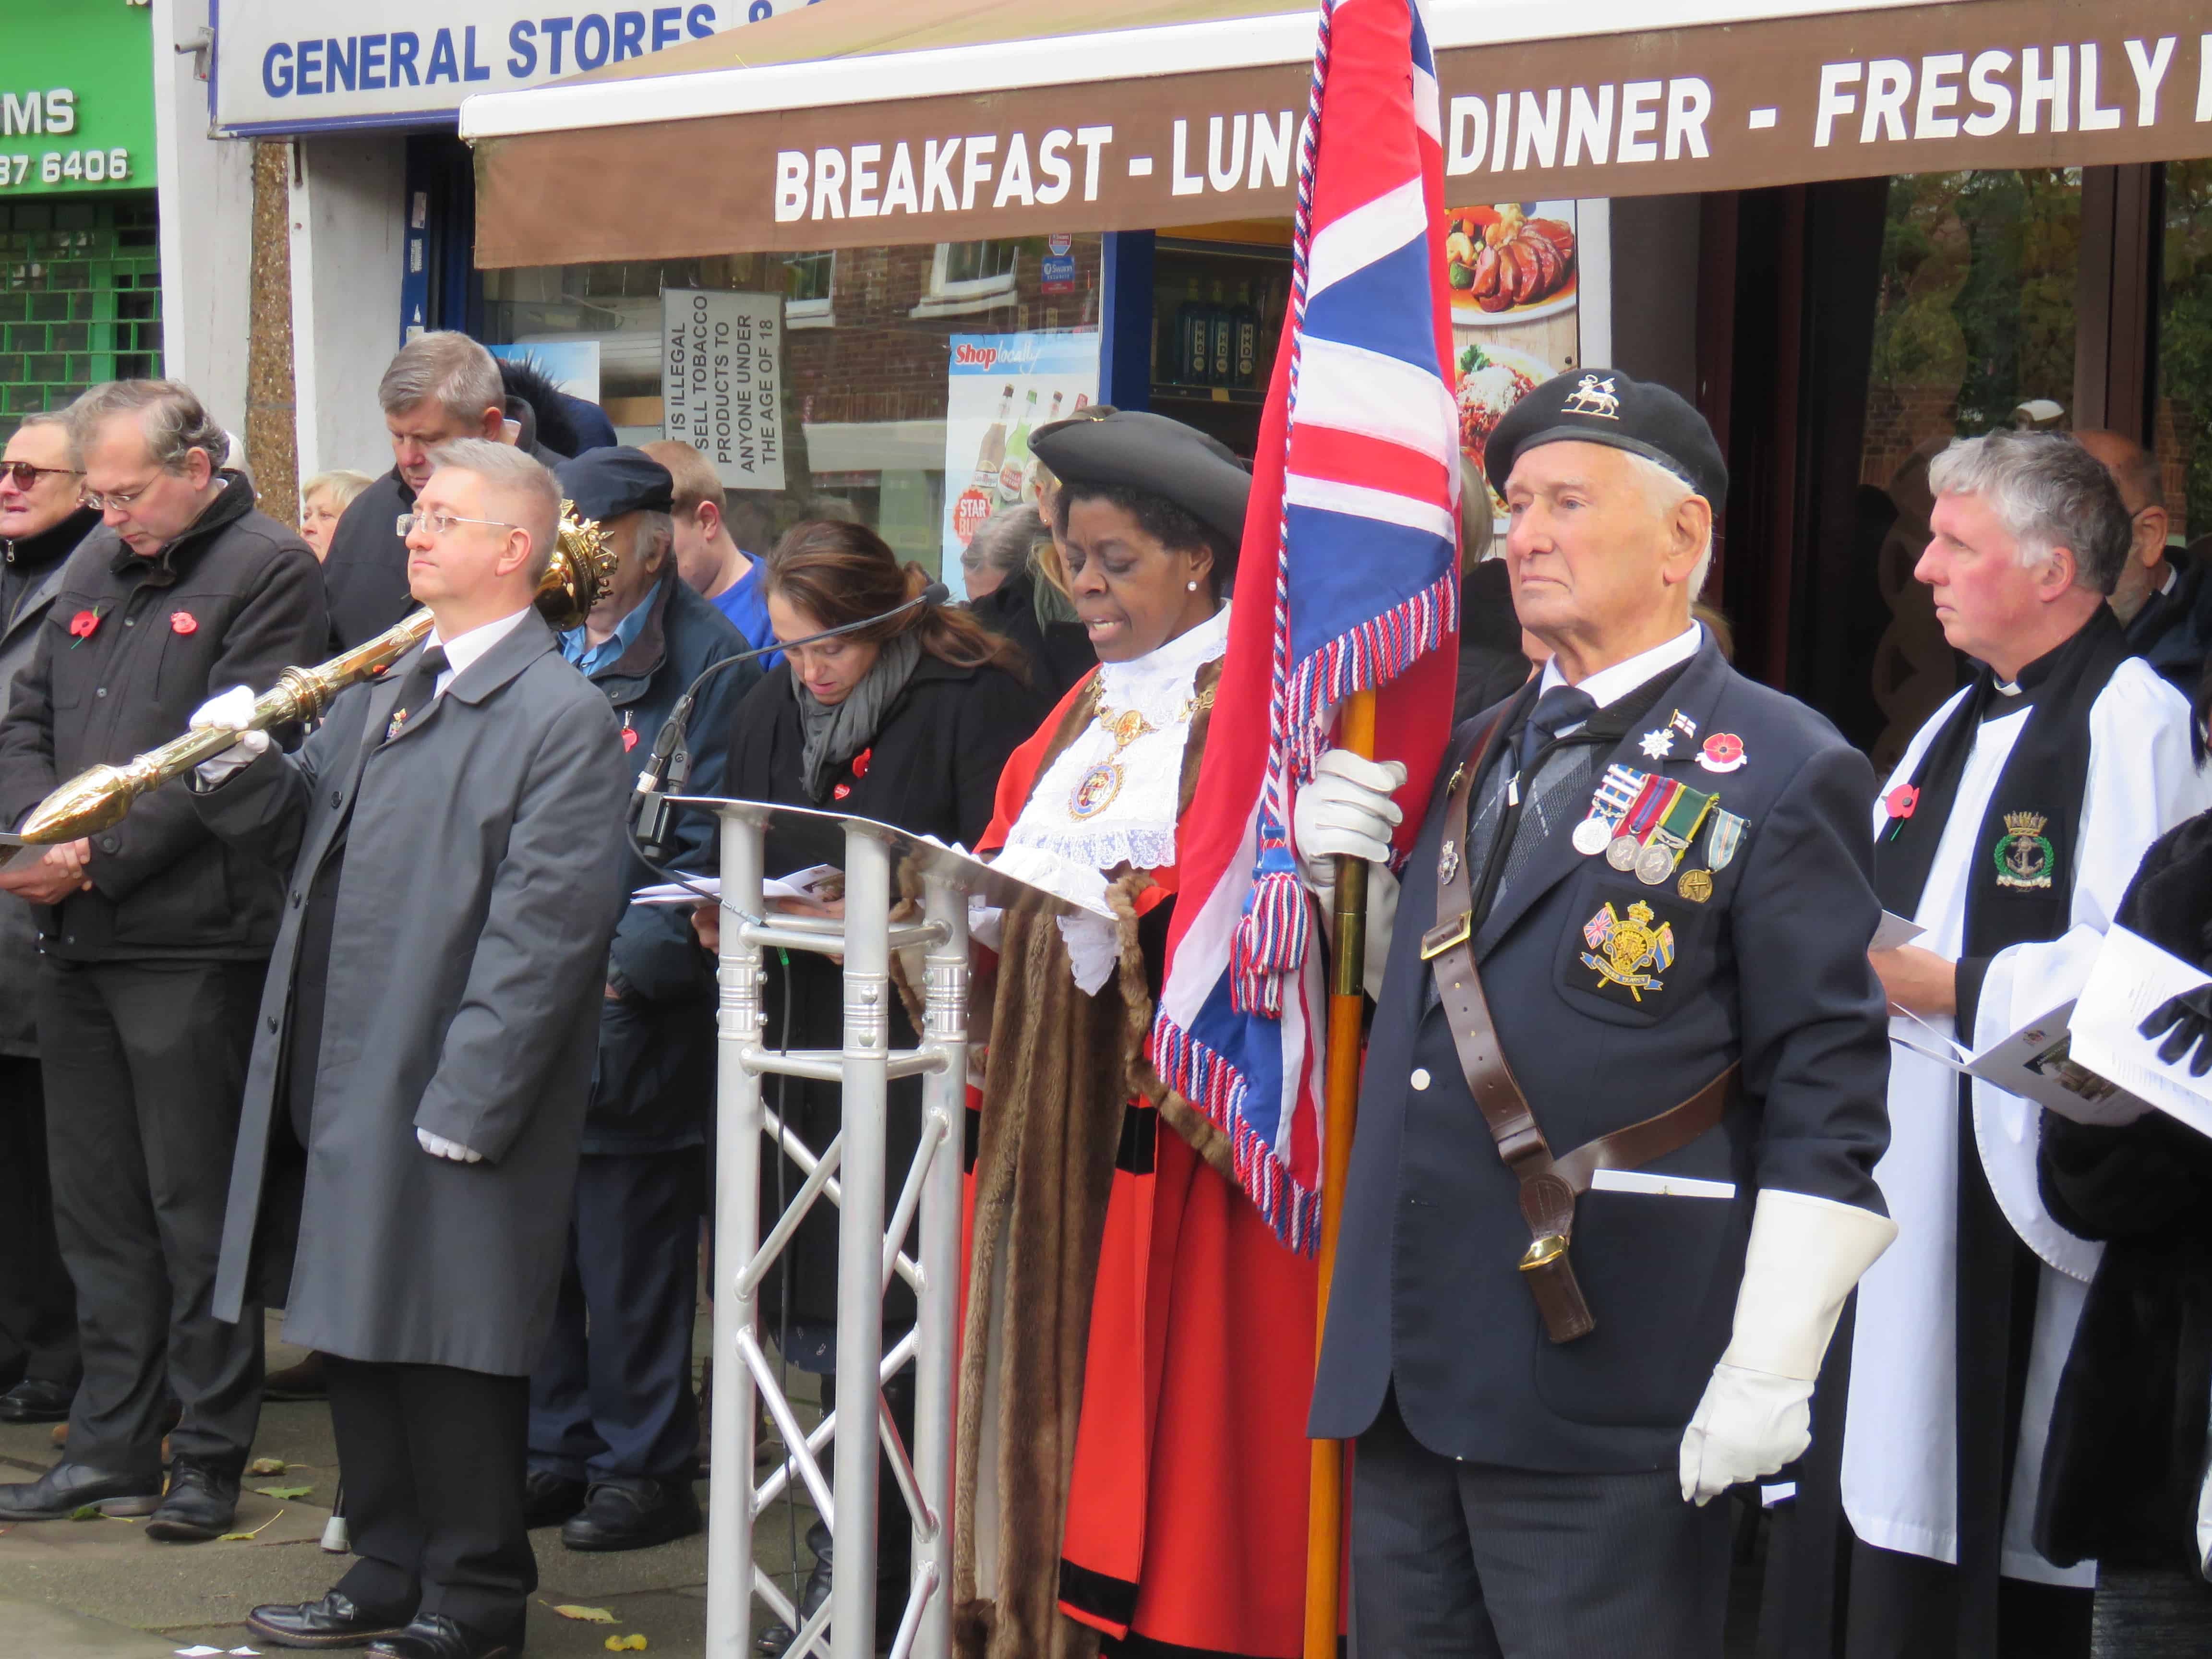 Armistice Day: Bermondsey pays respects to fallen at West Lane memorial - Southwark News